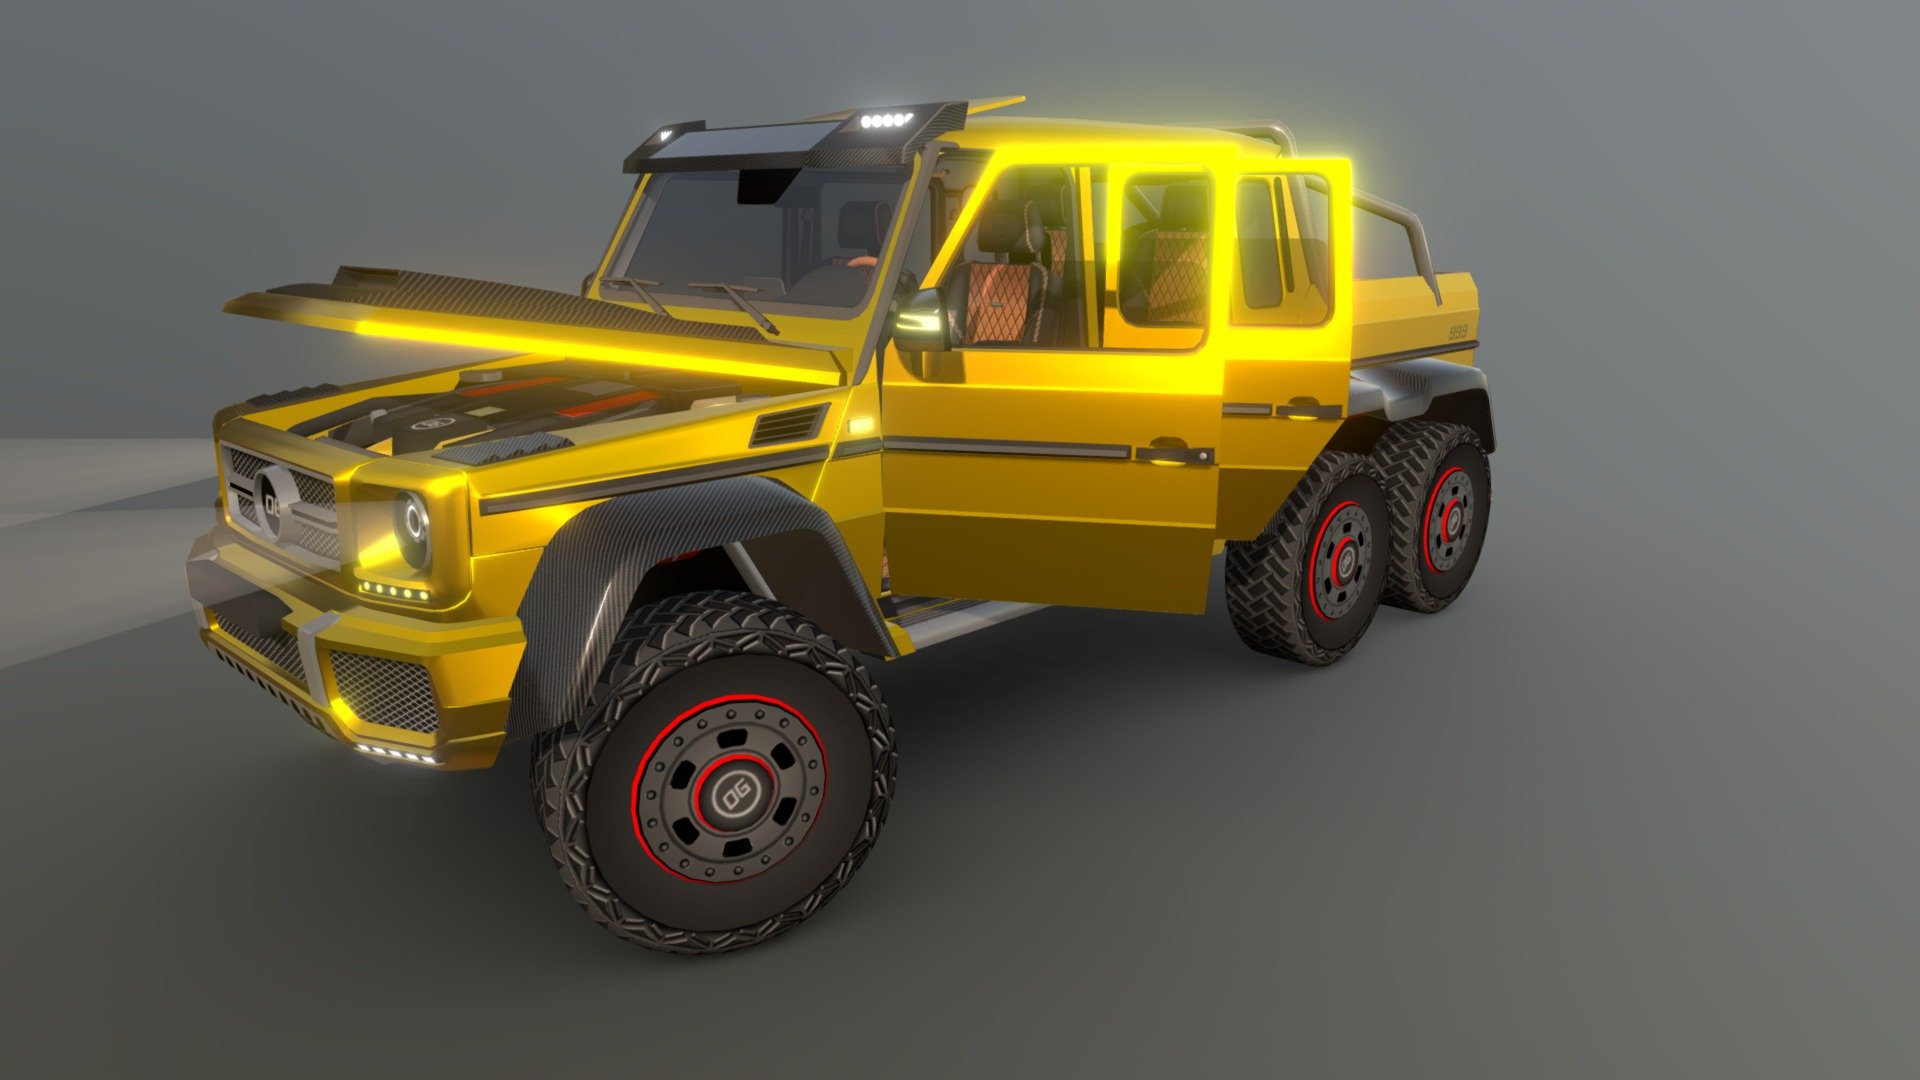 Low poly model for mobile game with interrior and moving parts
13.8k verts
28k triangles
17.3k polygons
Textures 256x256 to 2048x2048
Created in blender3d 2022, Photoshop 2022 - Mercedes G63 6X6 Golden - 3D model by Главмеш (@glavmesh) 3d model